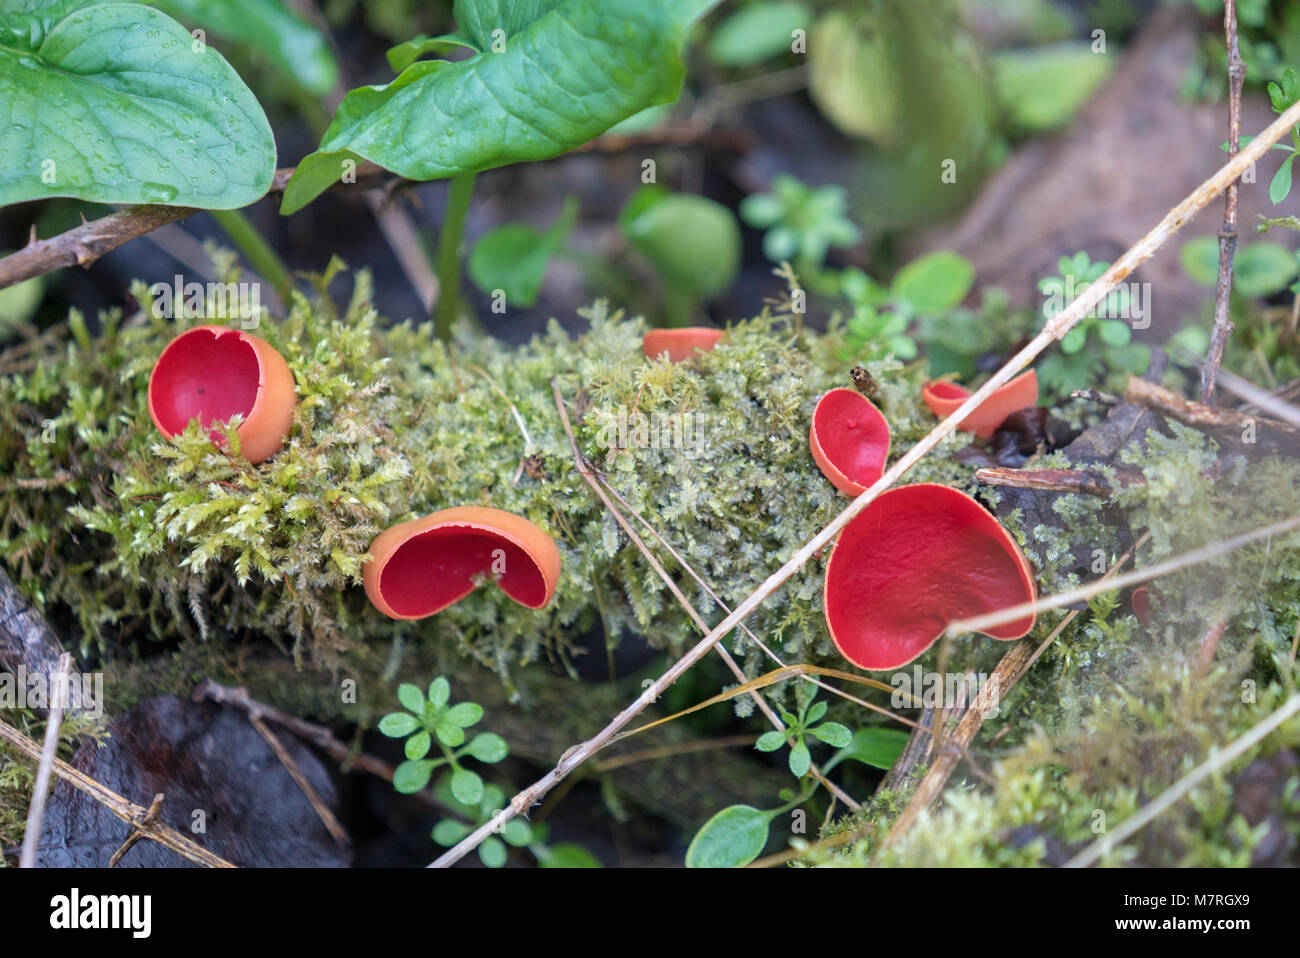 Spring mushroom, fungus, Sarcoscypha coccinea, the scarlet elf cup on the damp forest floor in Great Elm, Somerset UK Stock Photo